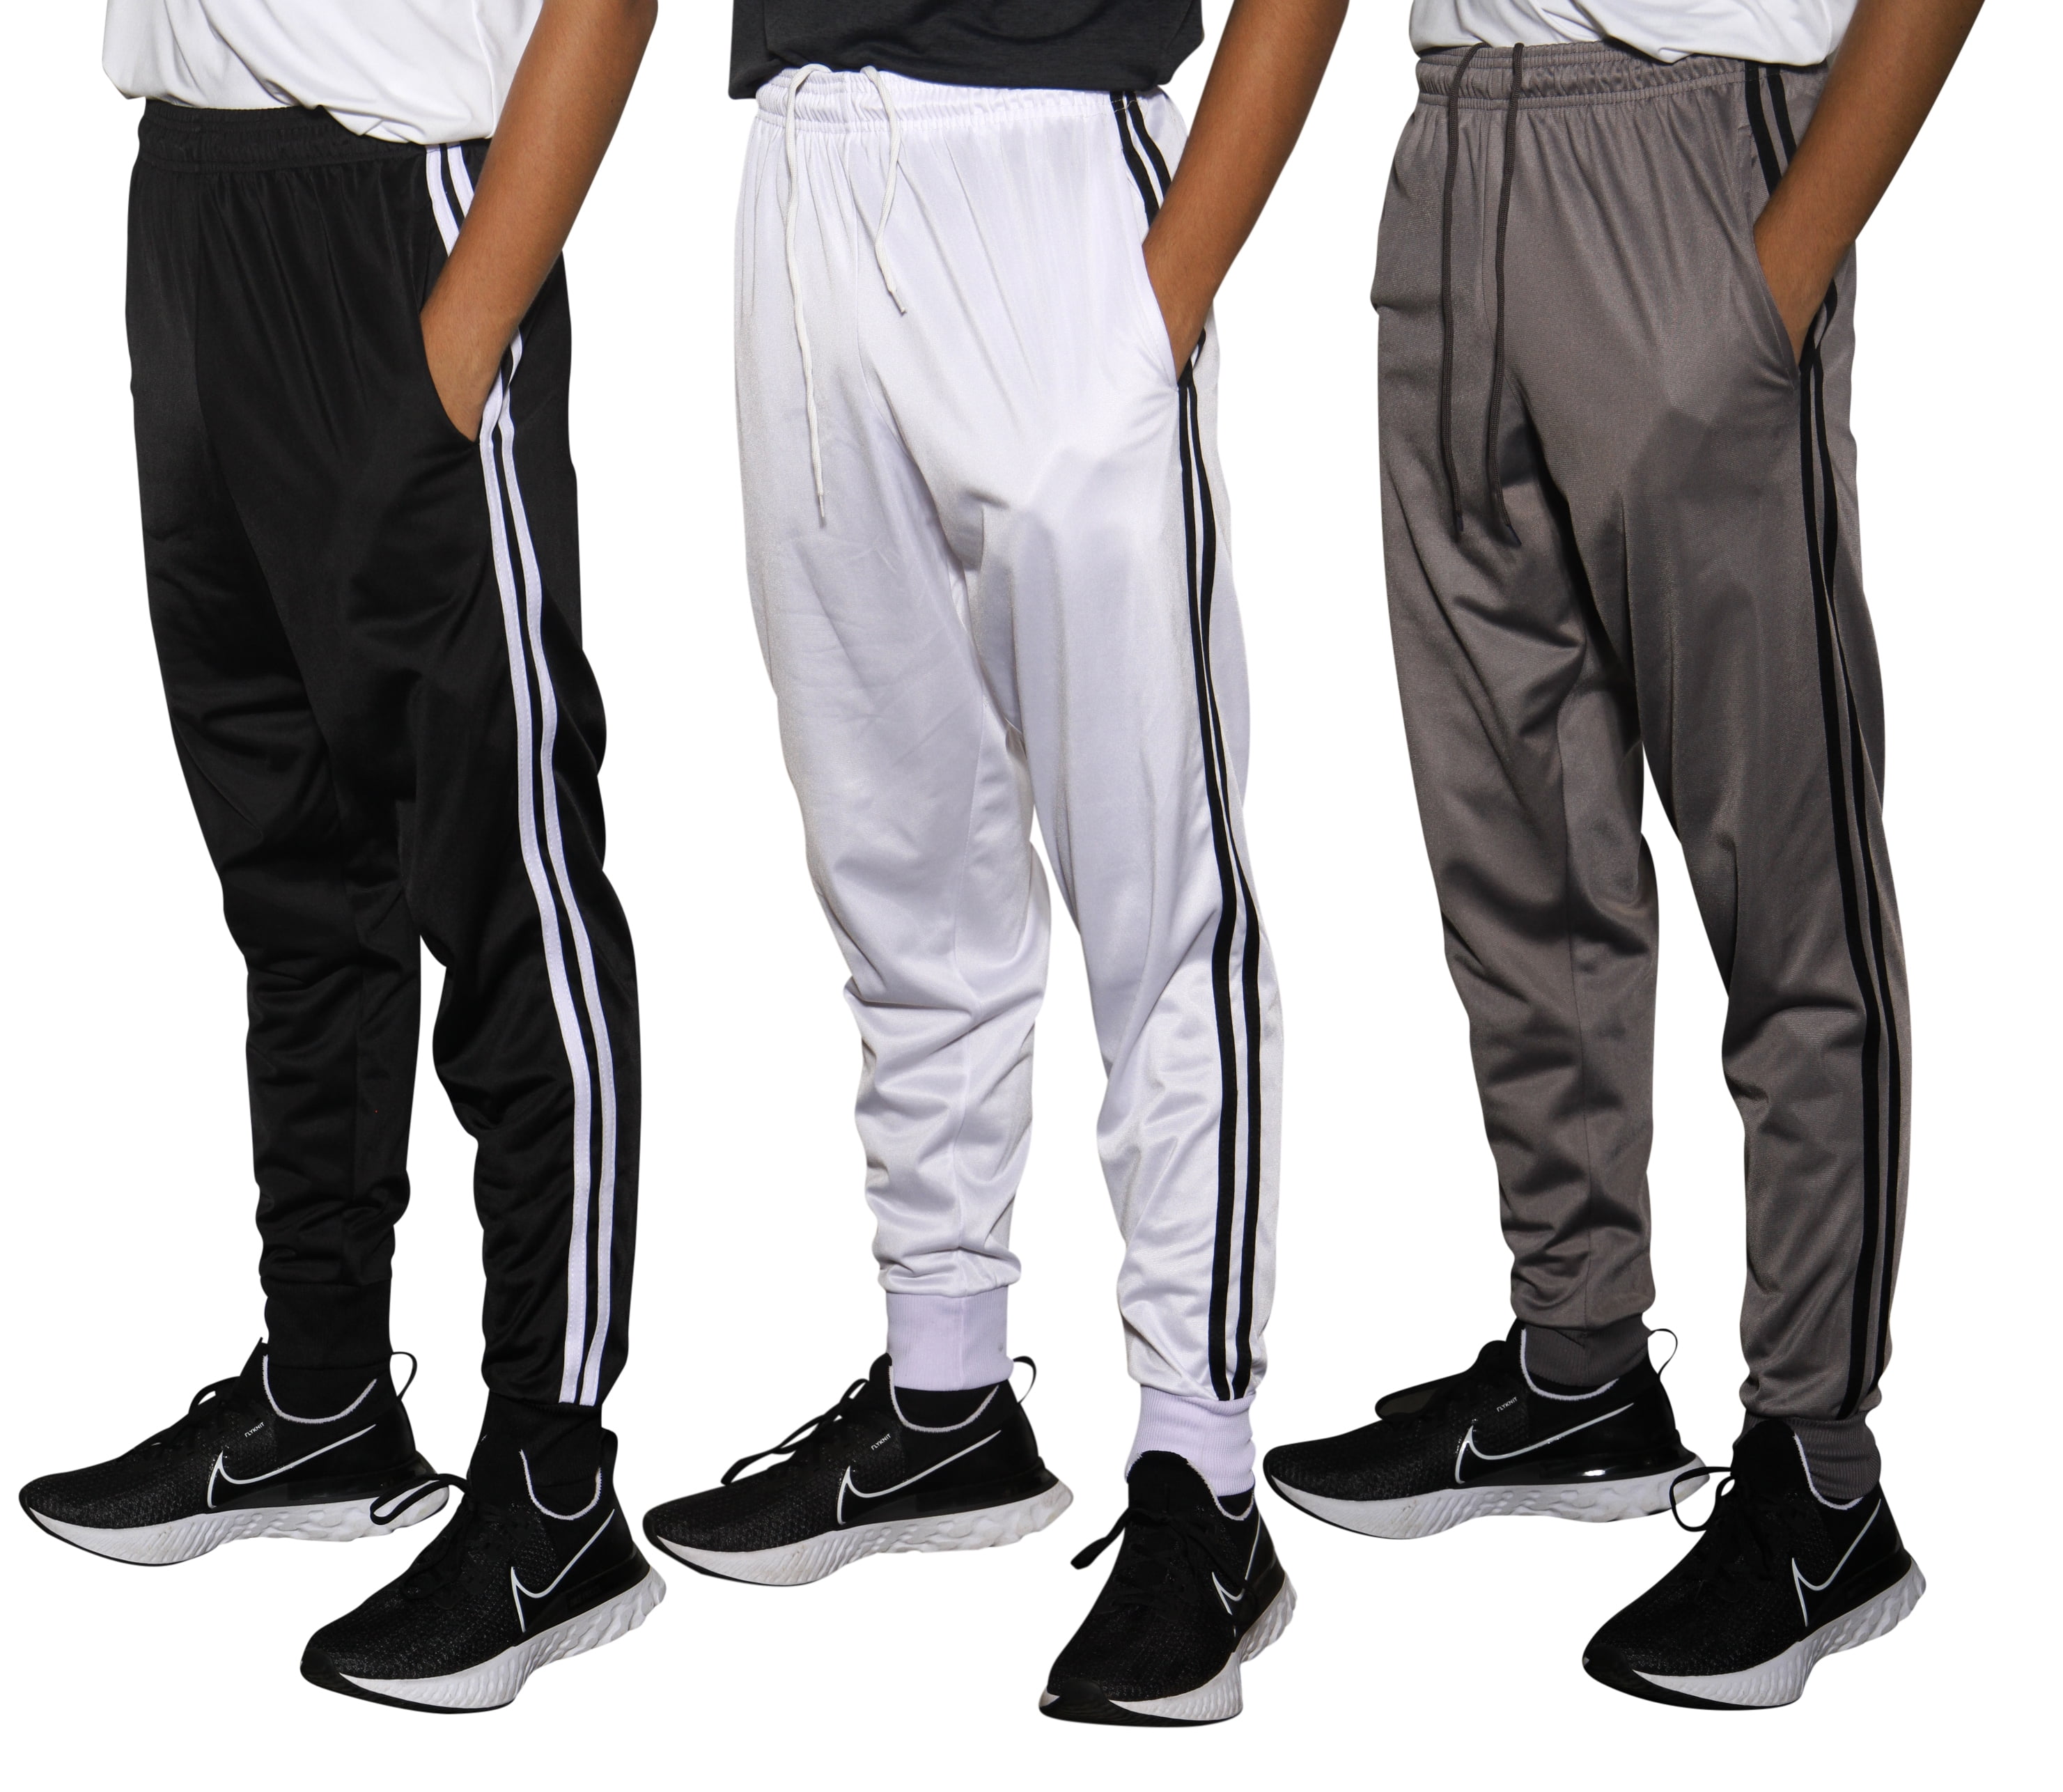 Men's Tech Fleece Active Athletic Casual Jogger Sweatpants with Pockets Real Essentials 3 Pack 